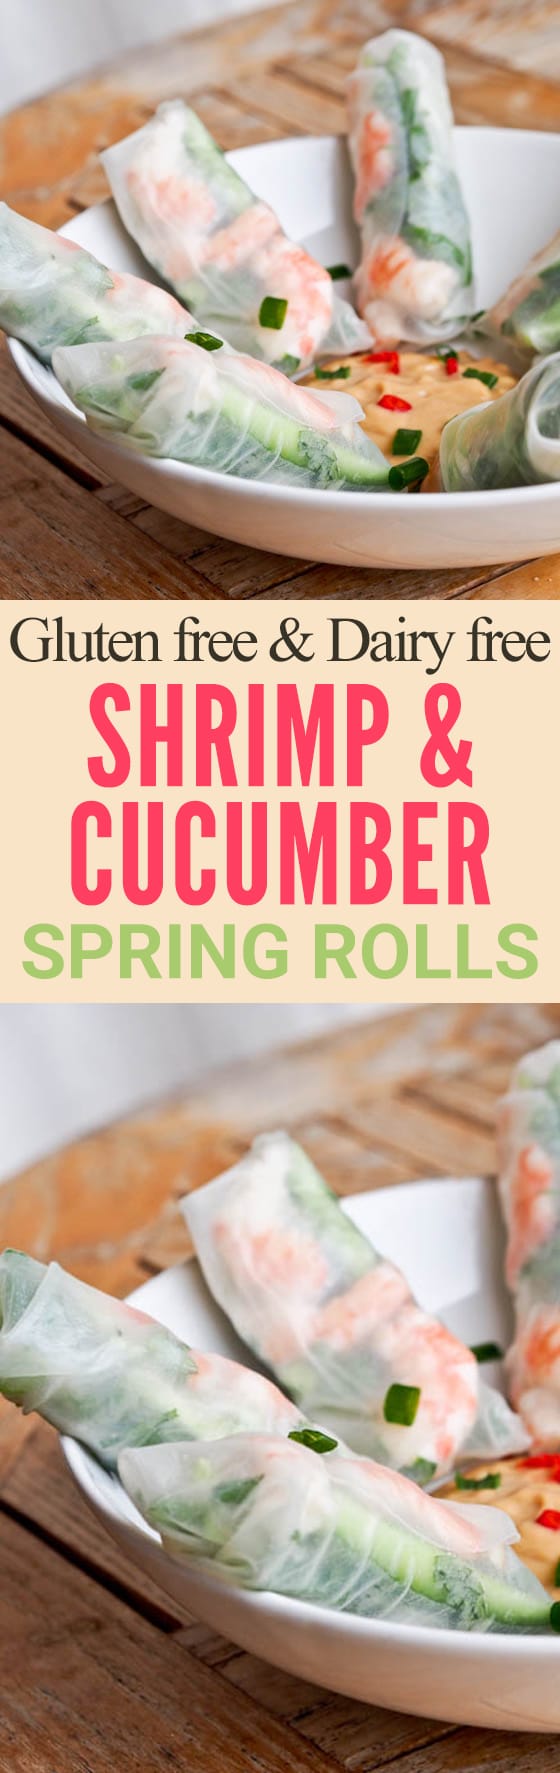 Shrimp and cucumber fresh spring rolls are going to be your favorite summer appetizer or light meal! Skip the fried rolls and make these fresh spring rolls instead. Served with a creamy peanut dipping sauce. Gluten free and dairy free too.